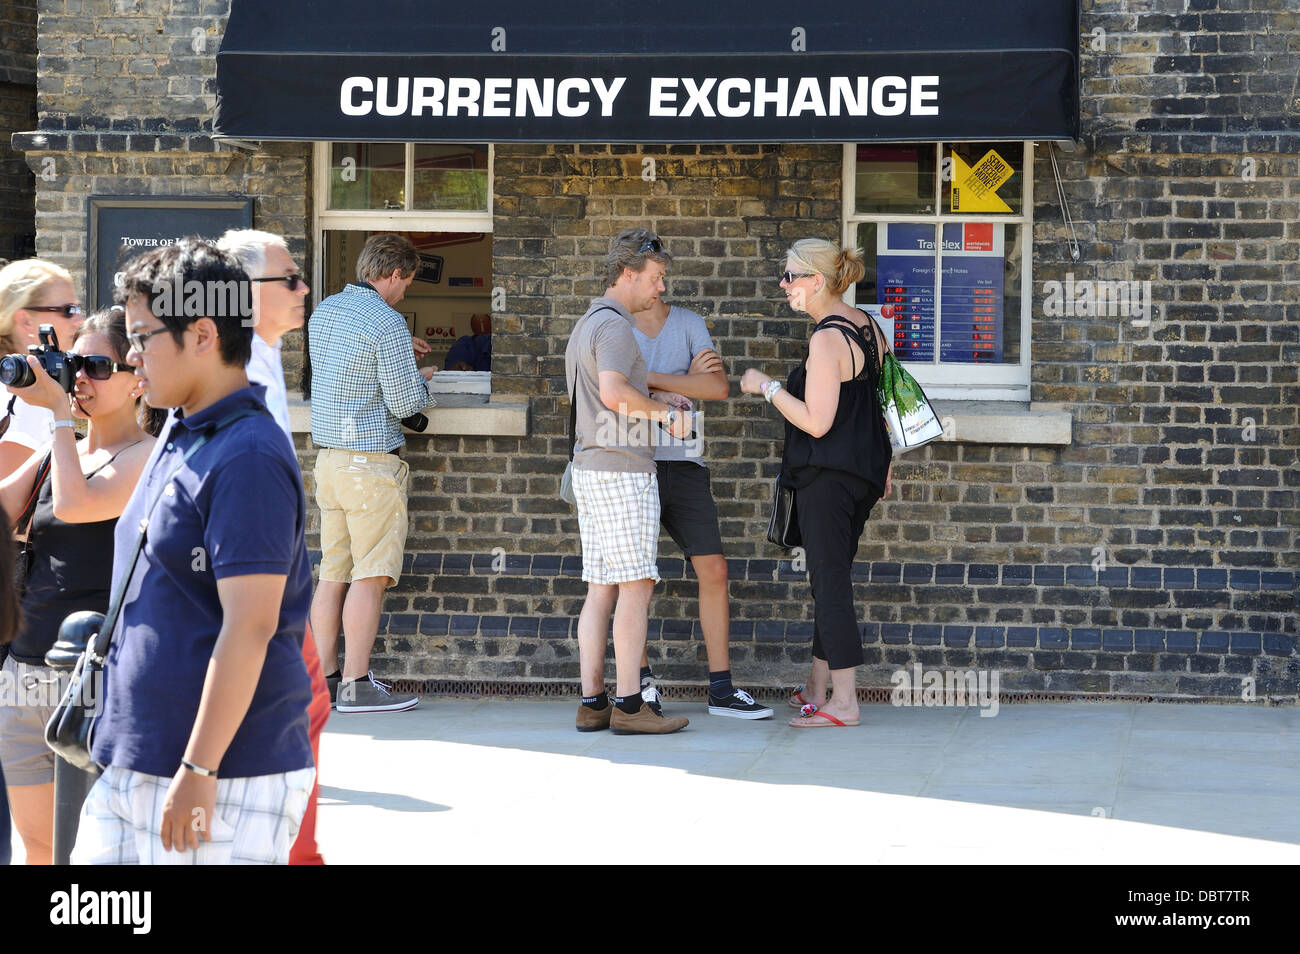 People outside currency exchange Tower Hill London Stock Photo